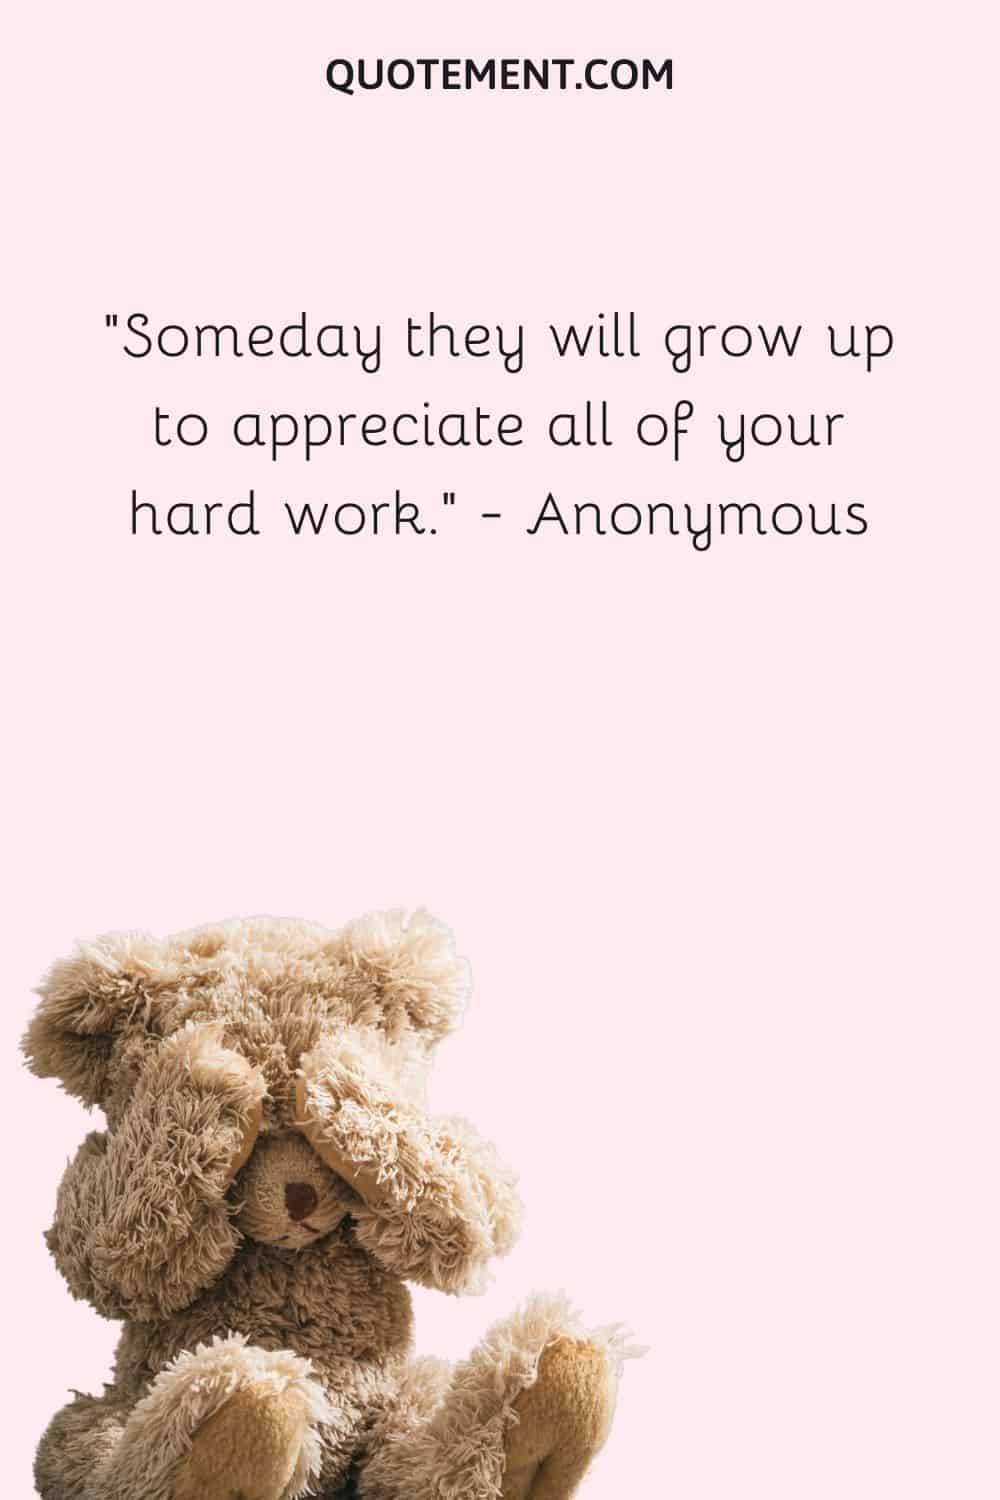 Someday they will grow up to appreciate all of your hard work. — Anonymous